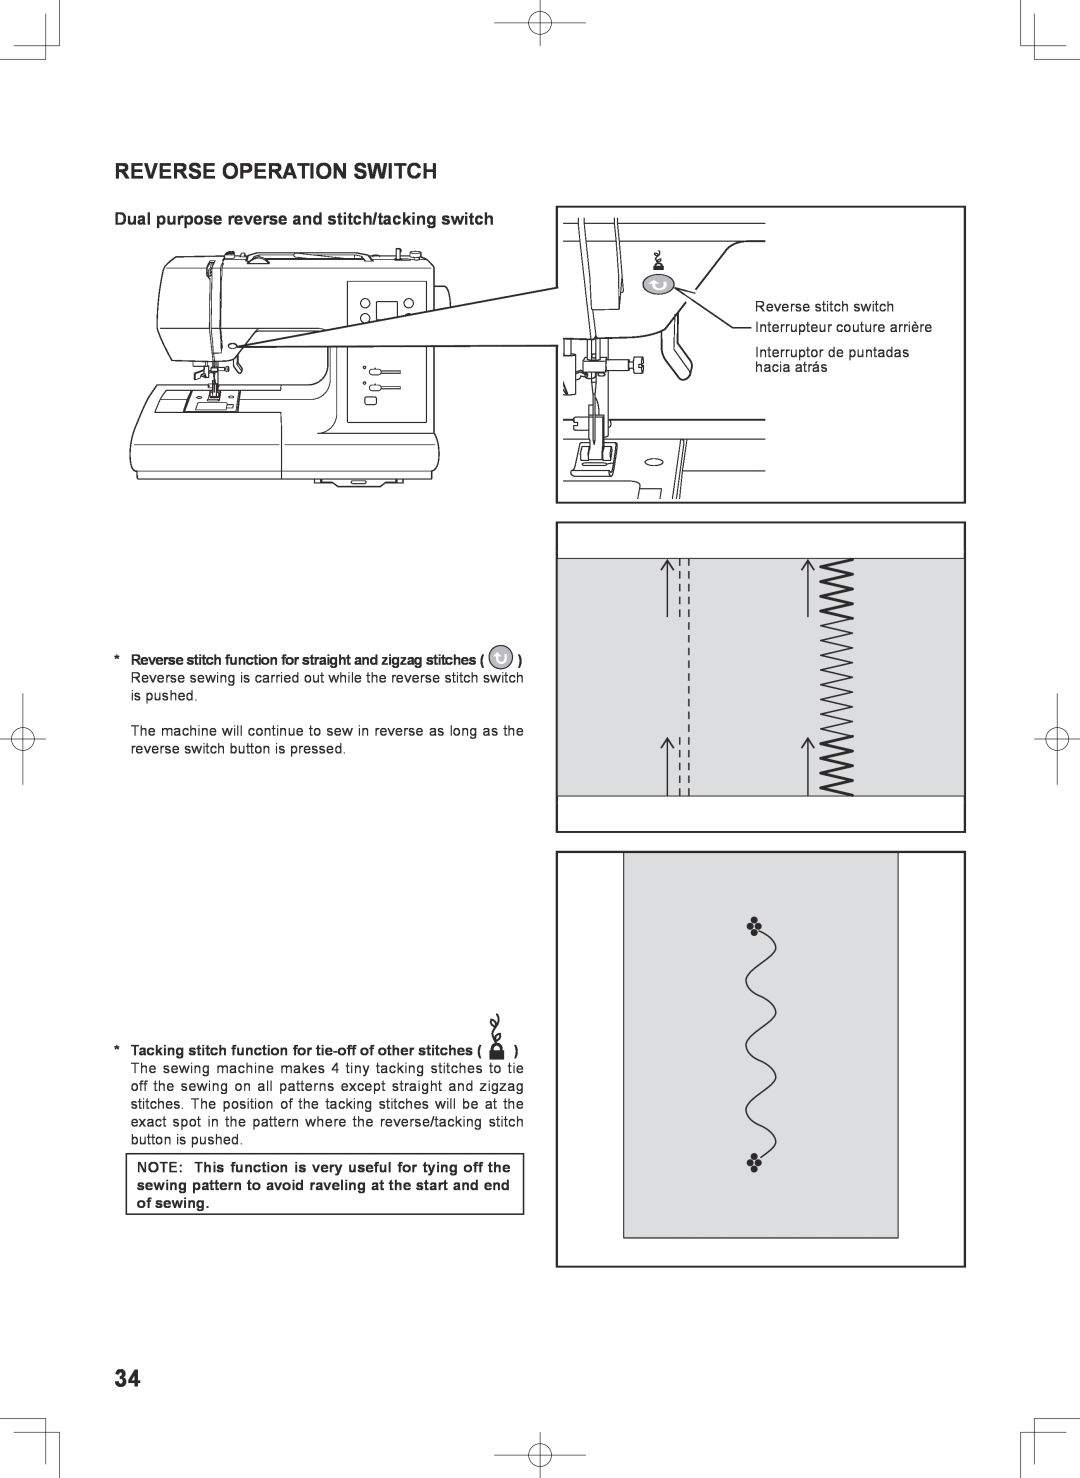 Singer 7467S instruction manual Reverse Operation Switch, Dual purpose reverse and stitch/tacking switch 